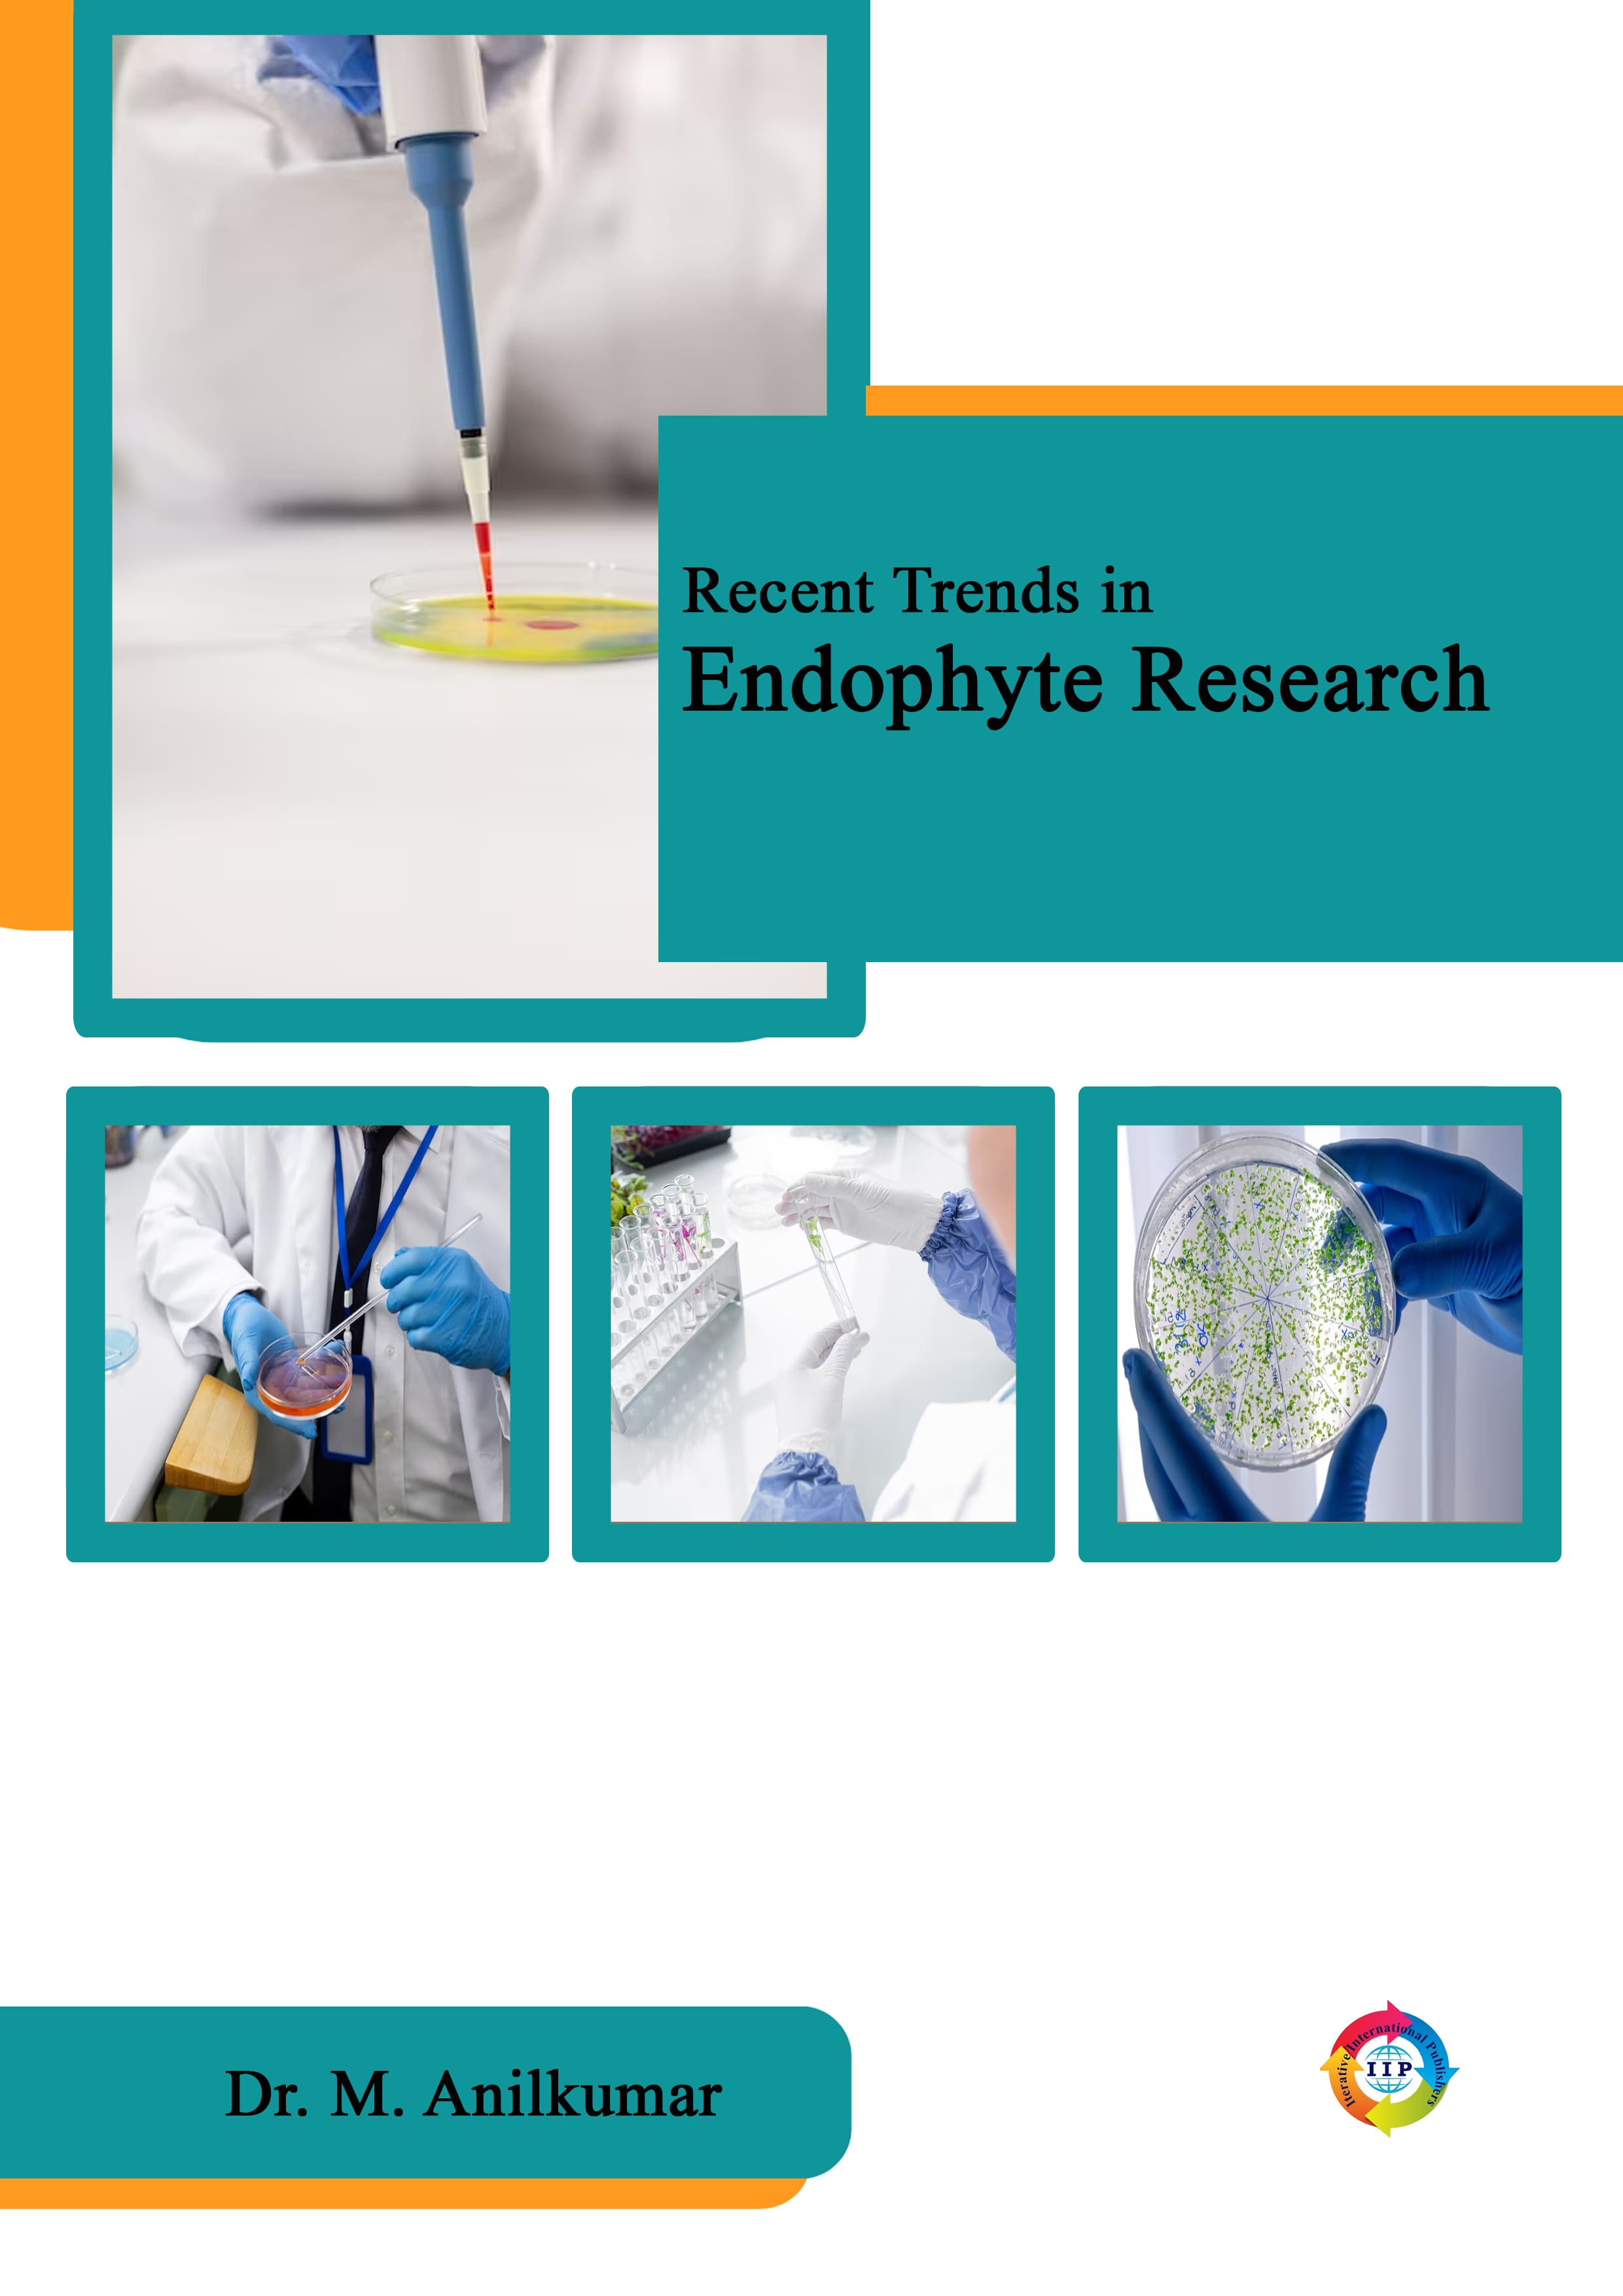 Recent Trends in Endophyte Research